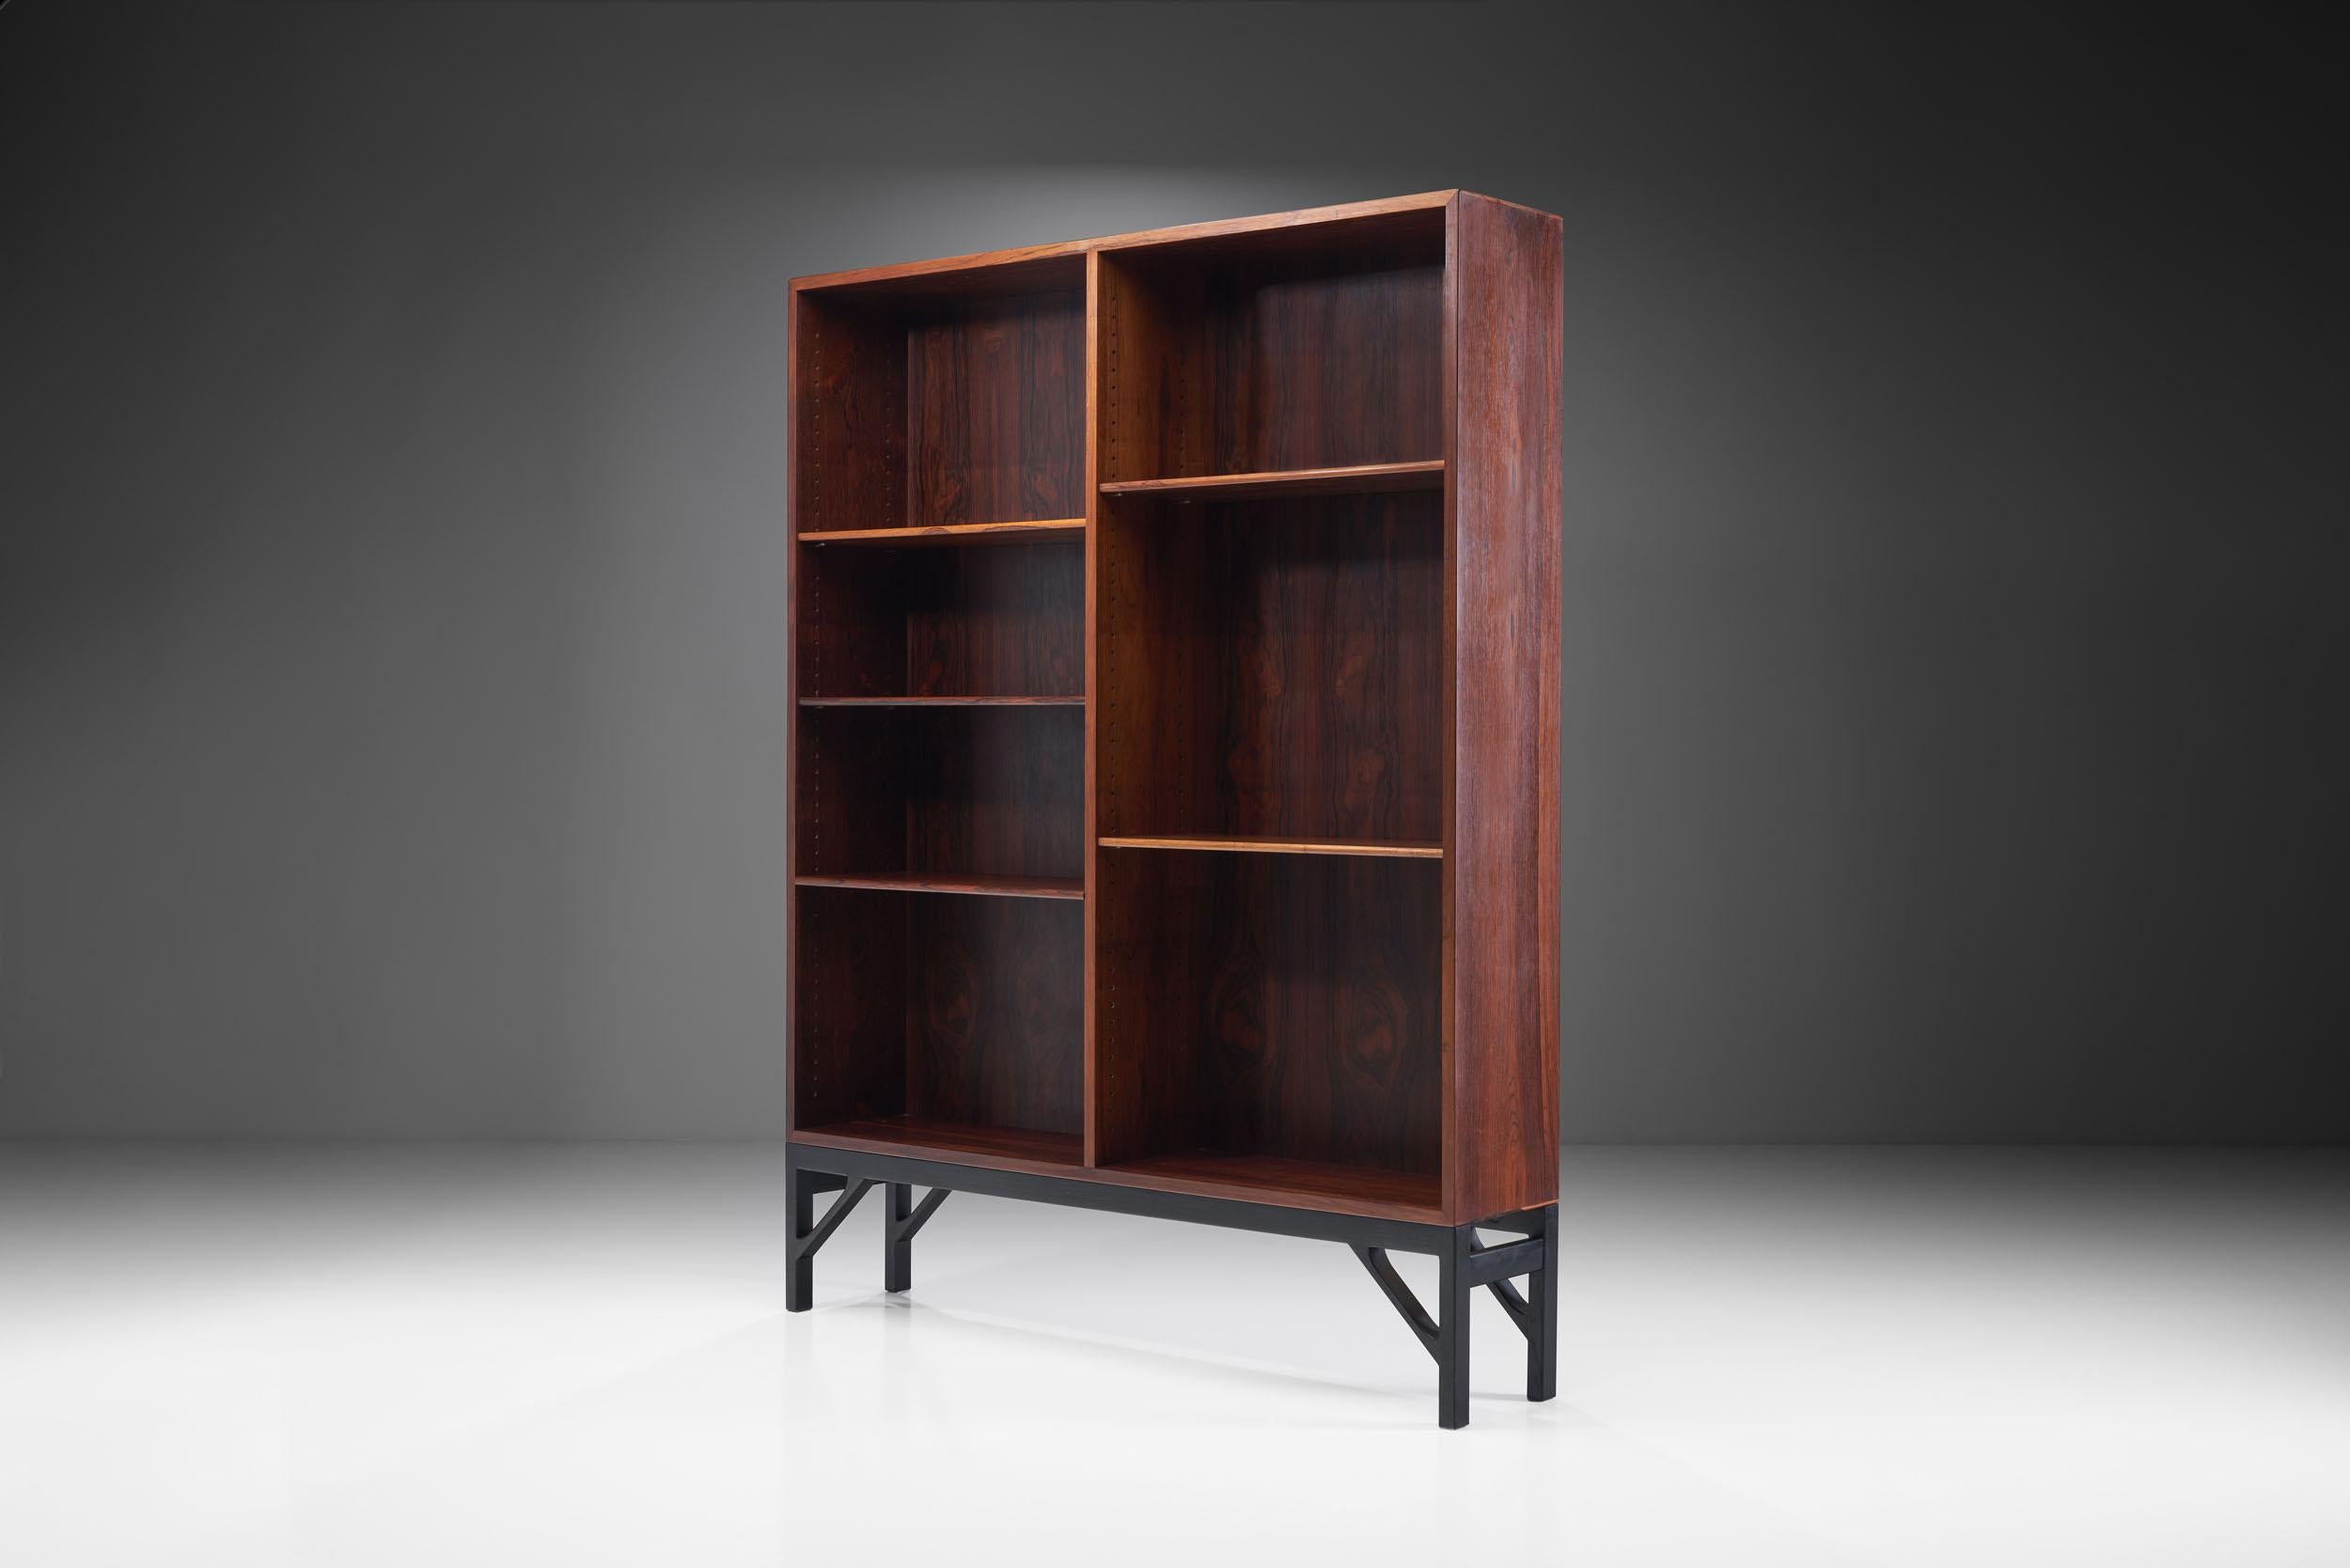 This impressive bookcase designed by Børge Mogensen reflects the Danish designer’s aesthetic that was clean and highly functional, creating pieces that stand out despite their restrained design.

The bookcase is made of wood with a beautiful